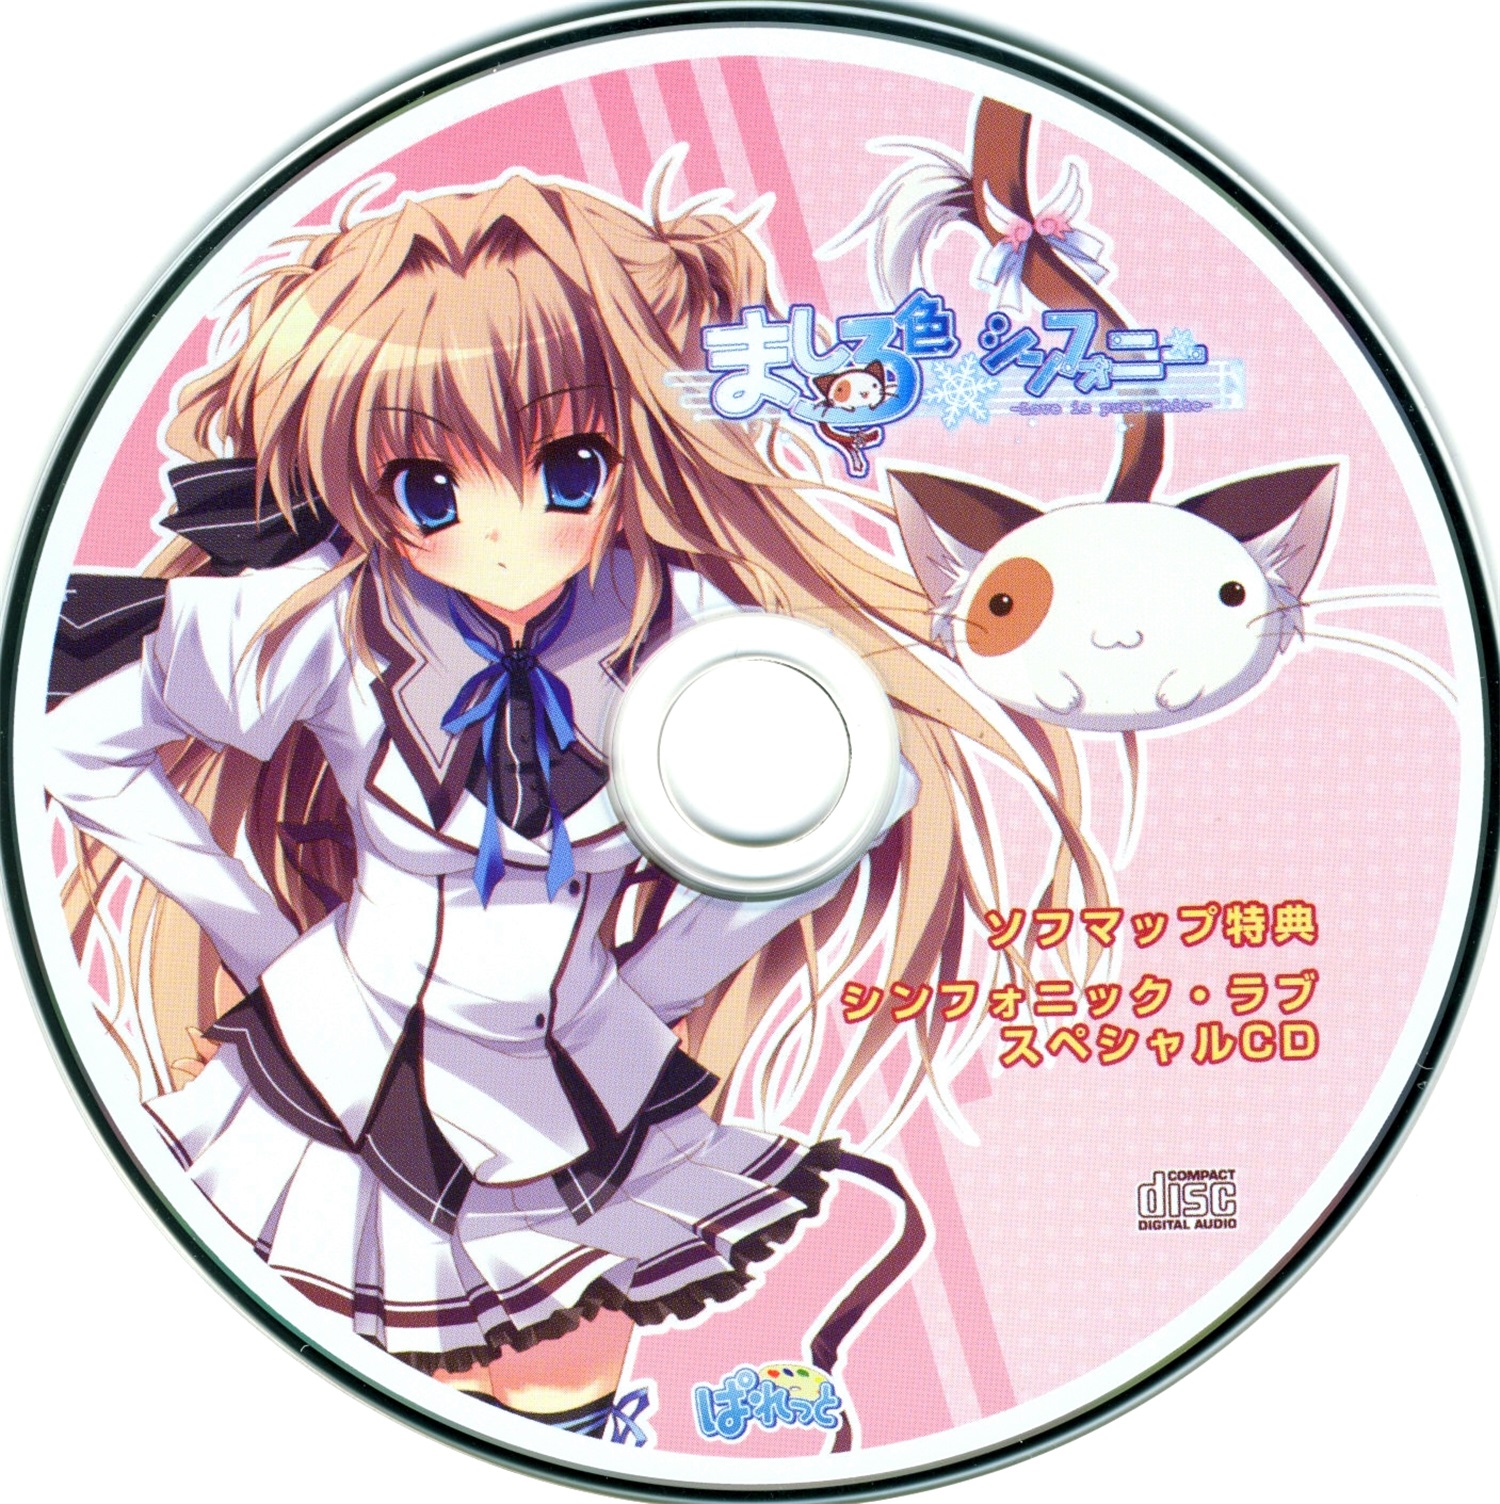 【WAV】ゲーム「ましろ色シンフォニー -Love is pure white-」Symphony Sofmap Privilege Symphonic Love Special Compact Disc／ぱれっと